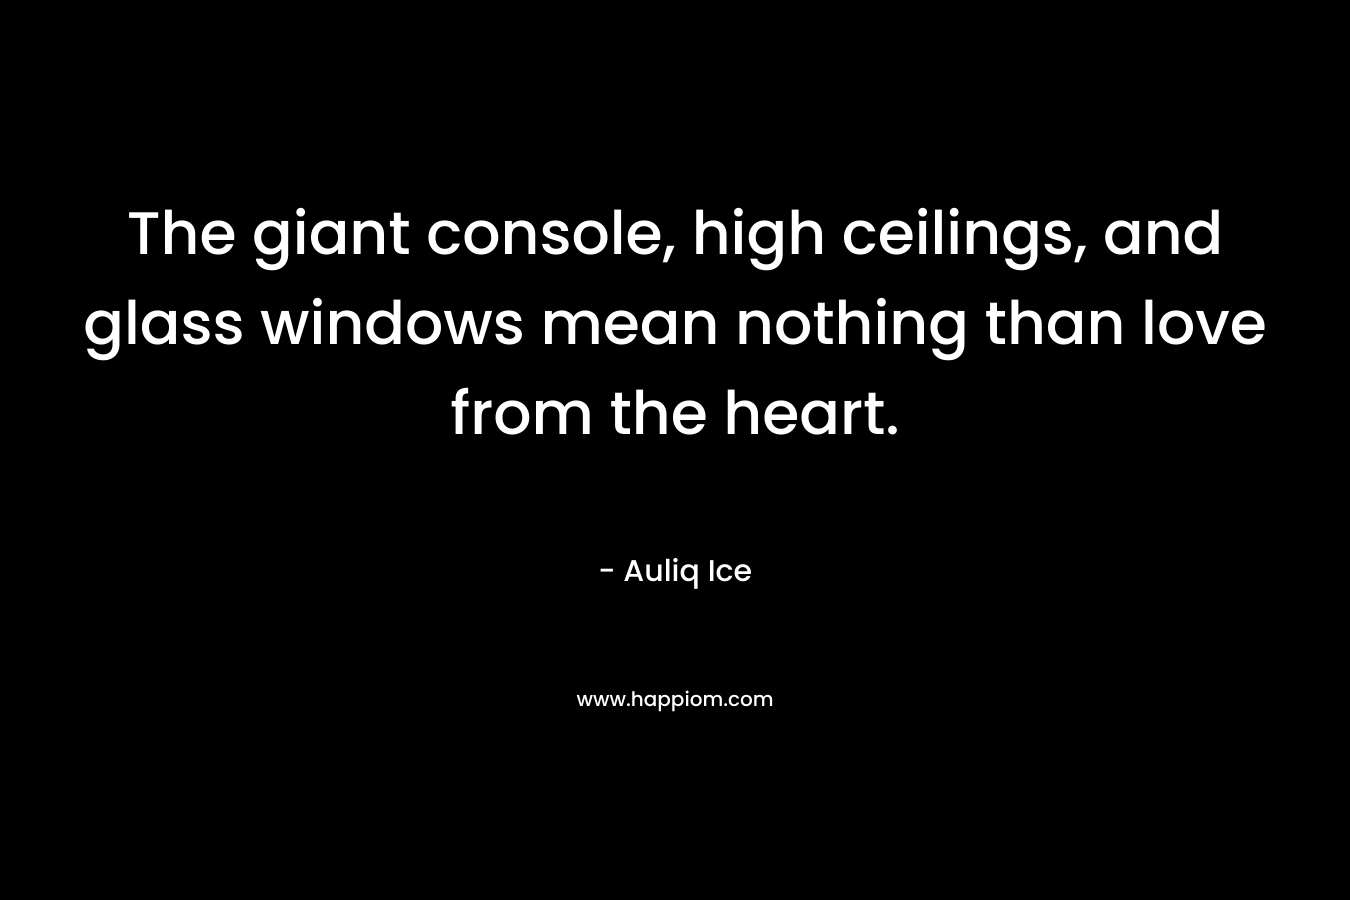 The giant console, high ceilings, and glass windows mean nothing than love from the heart. – Auliq Ice